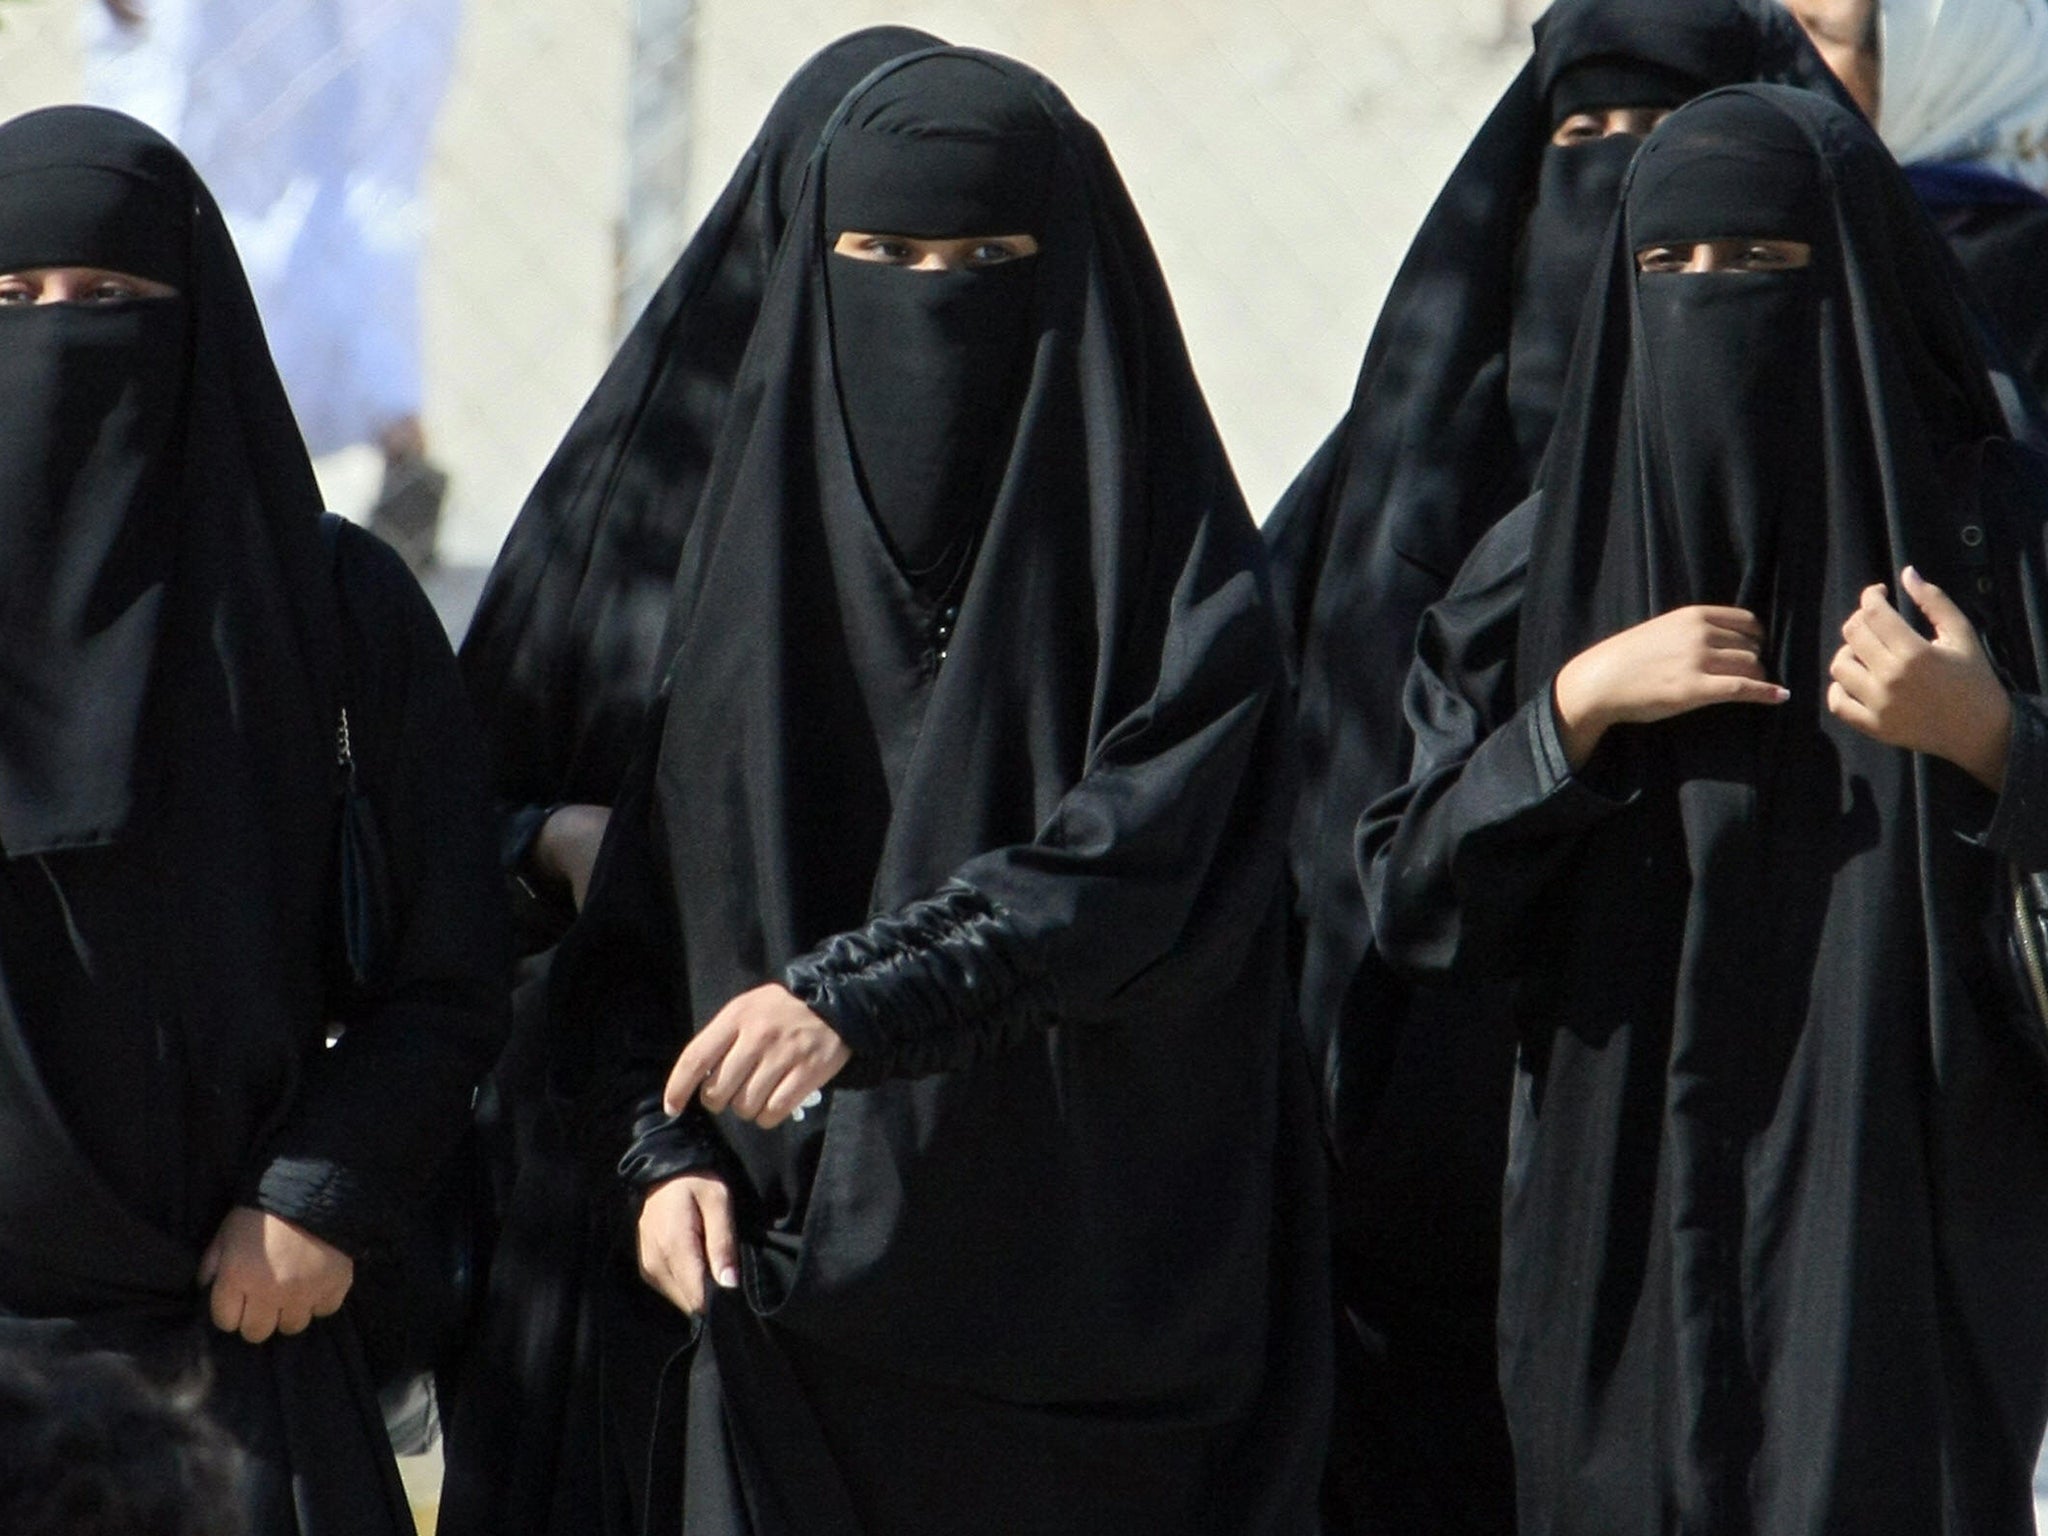 Saudi Arabian women finally allowed to apply for passport and travel independently The Independent The Independent pic